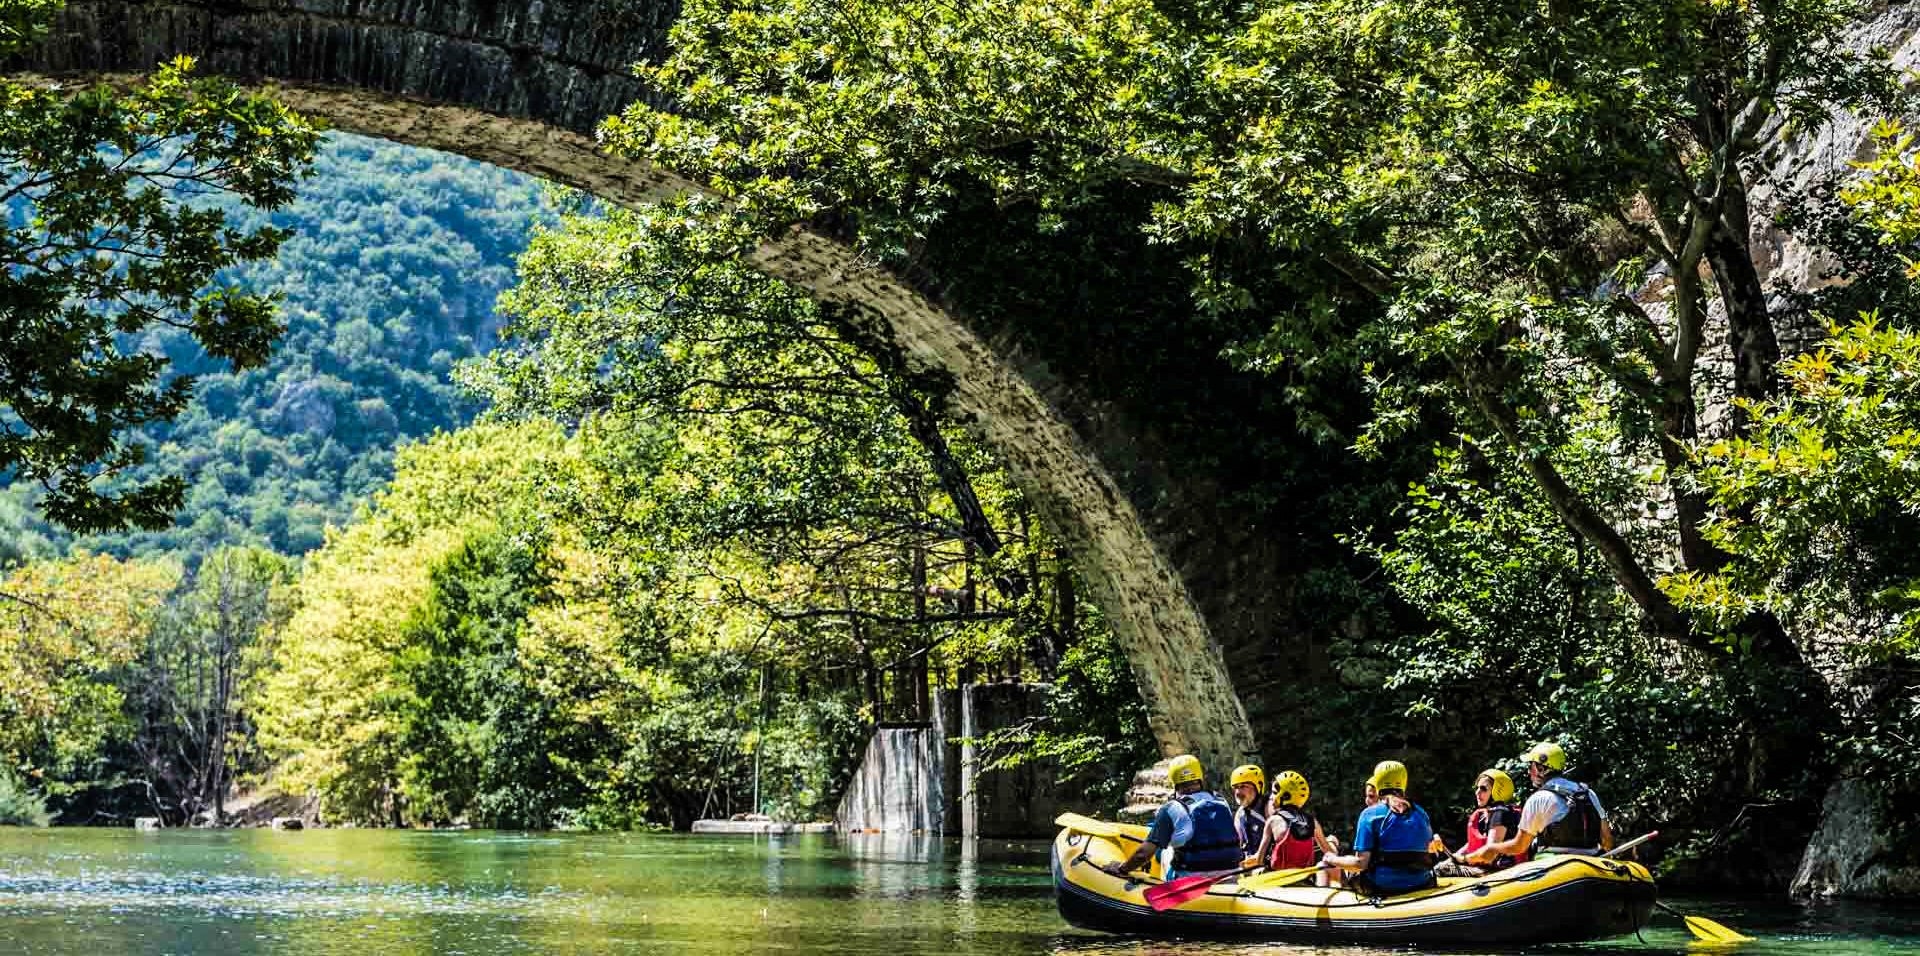 Enjoy A Day Rafting On The Voidomatis River Rafting Tour From Klidonia Village - Ioannina_94